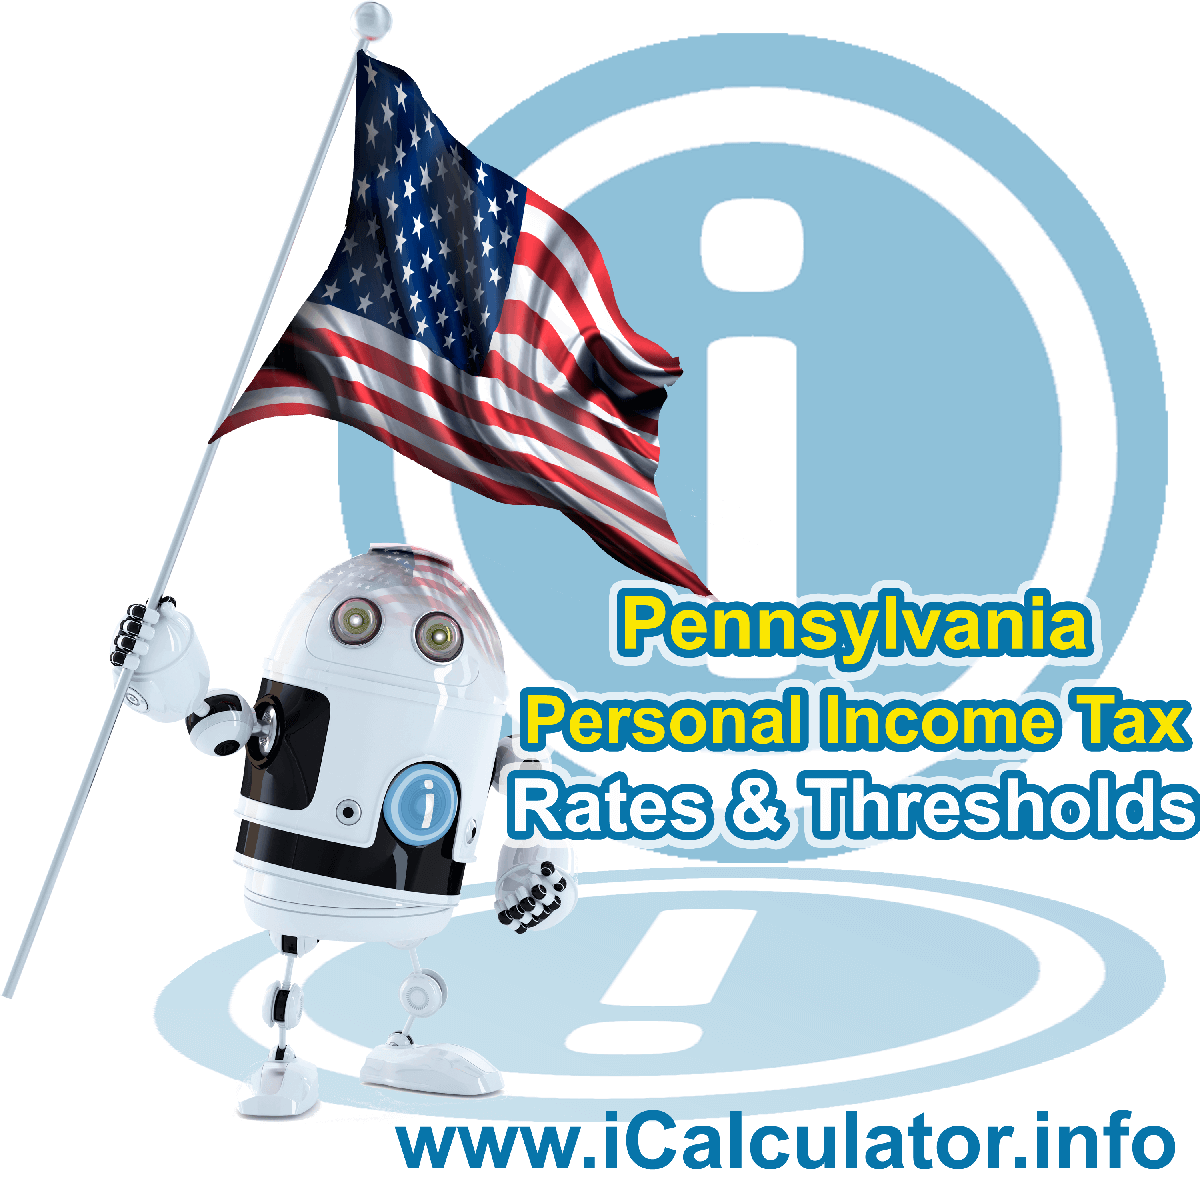 Pennsylvania State Tax Tables 2023. This image displays details of the Pennsylvania State Tax Tables for the 2023 tax return year which is provided in support of the 2023 US Tax Calculator